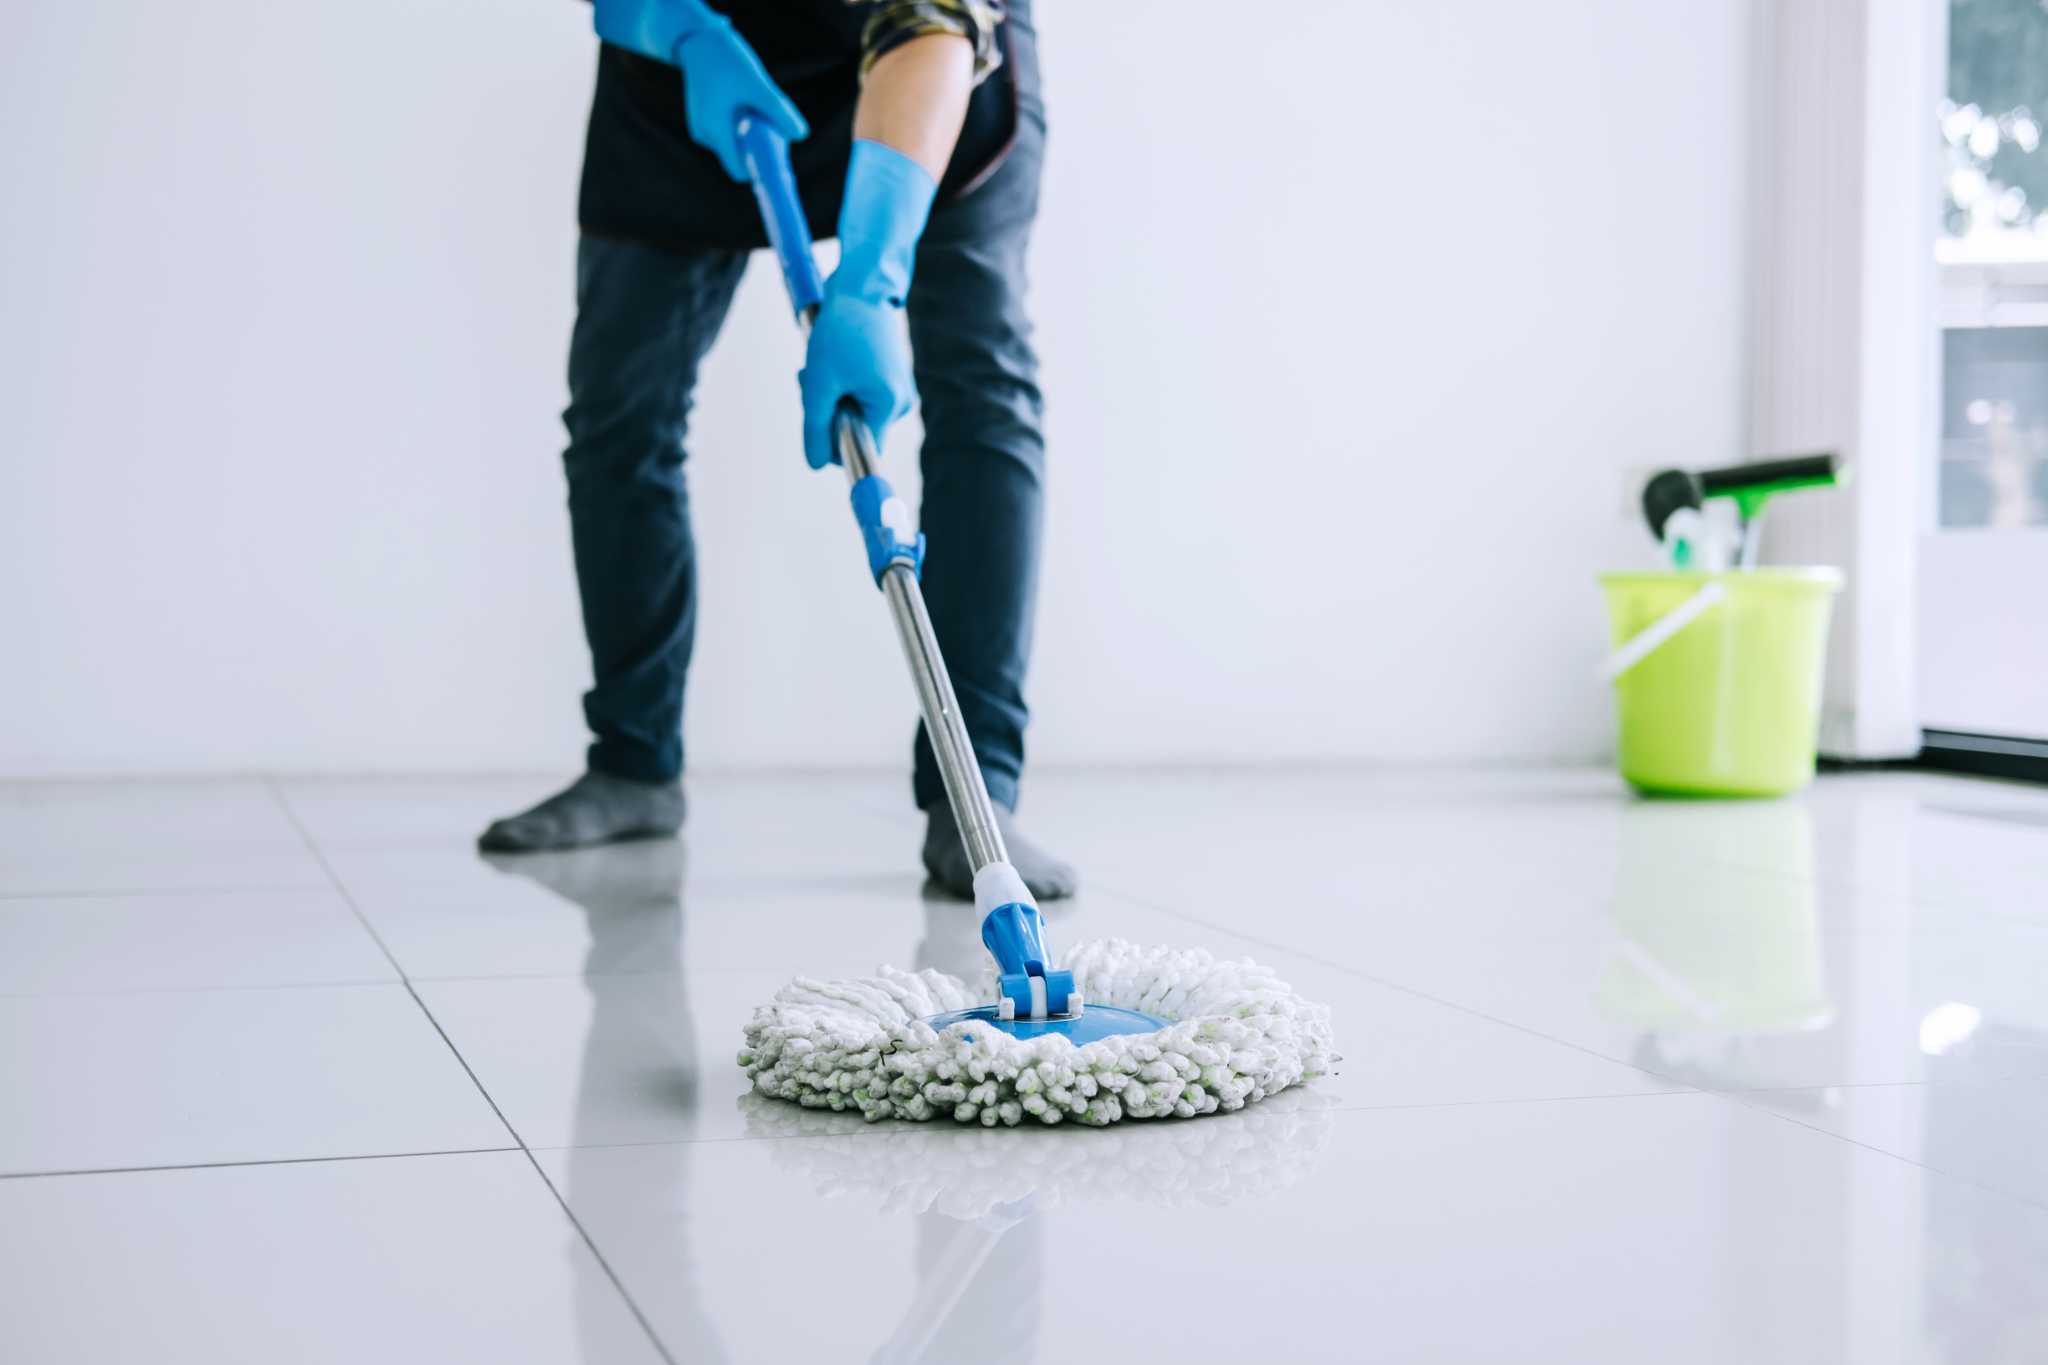 How to Clean Tile Floors With Vinegar and Baking Soda